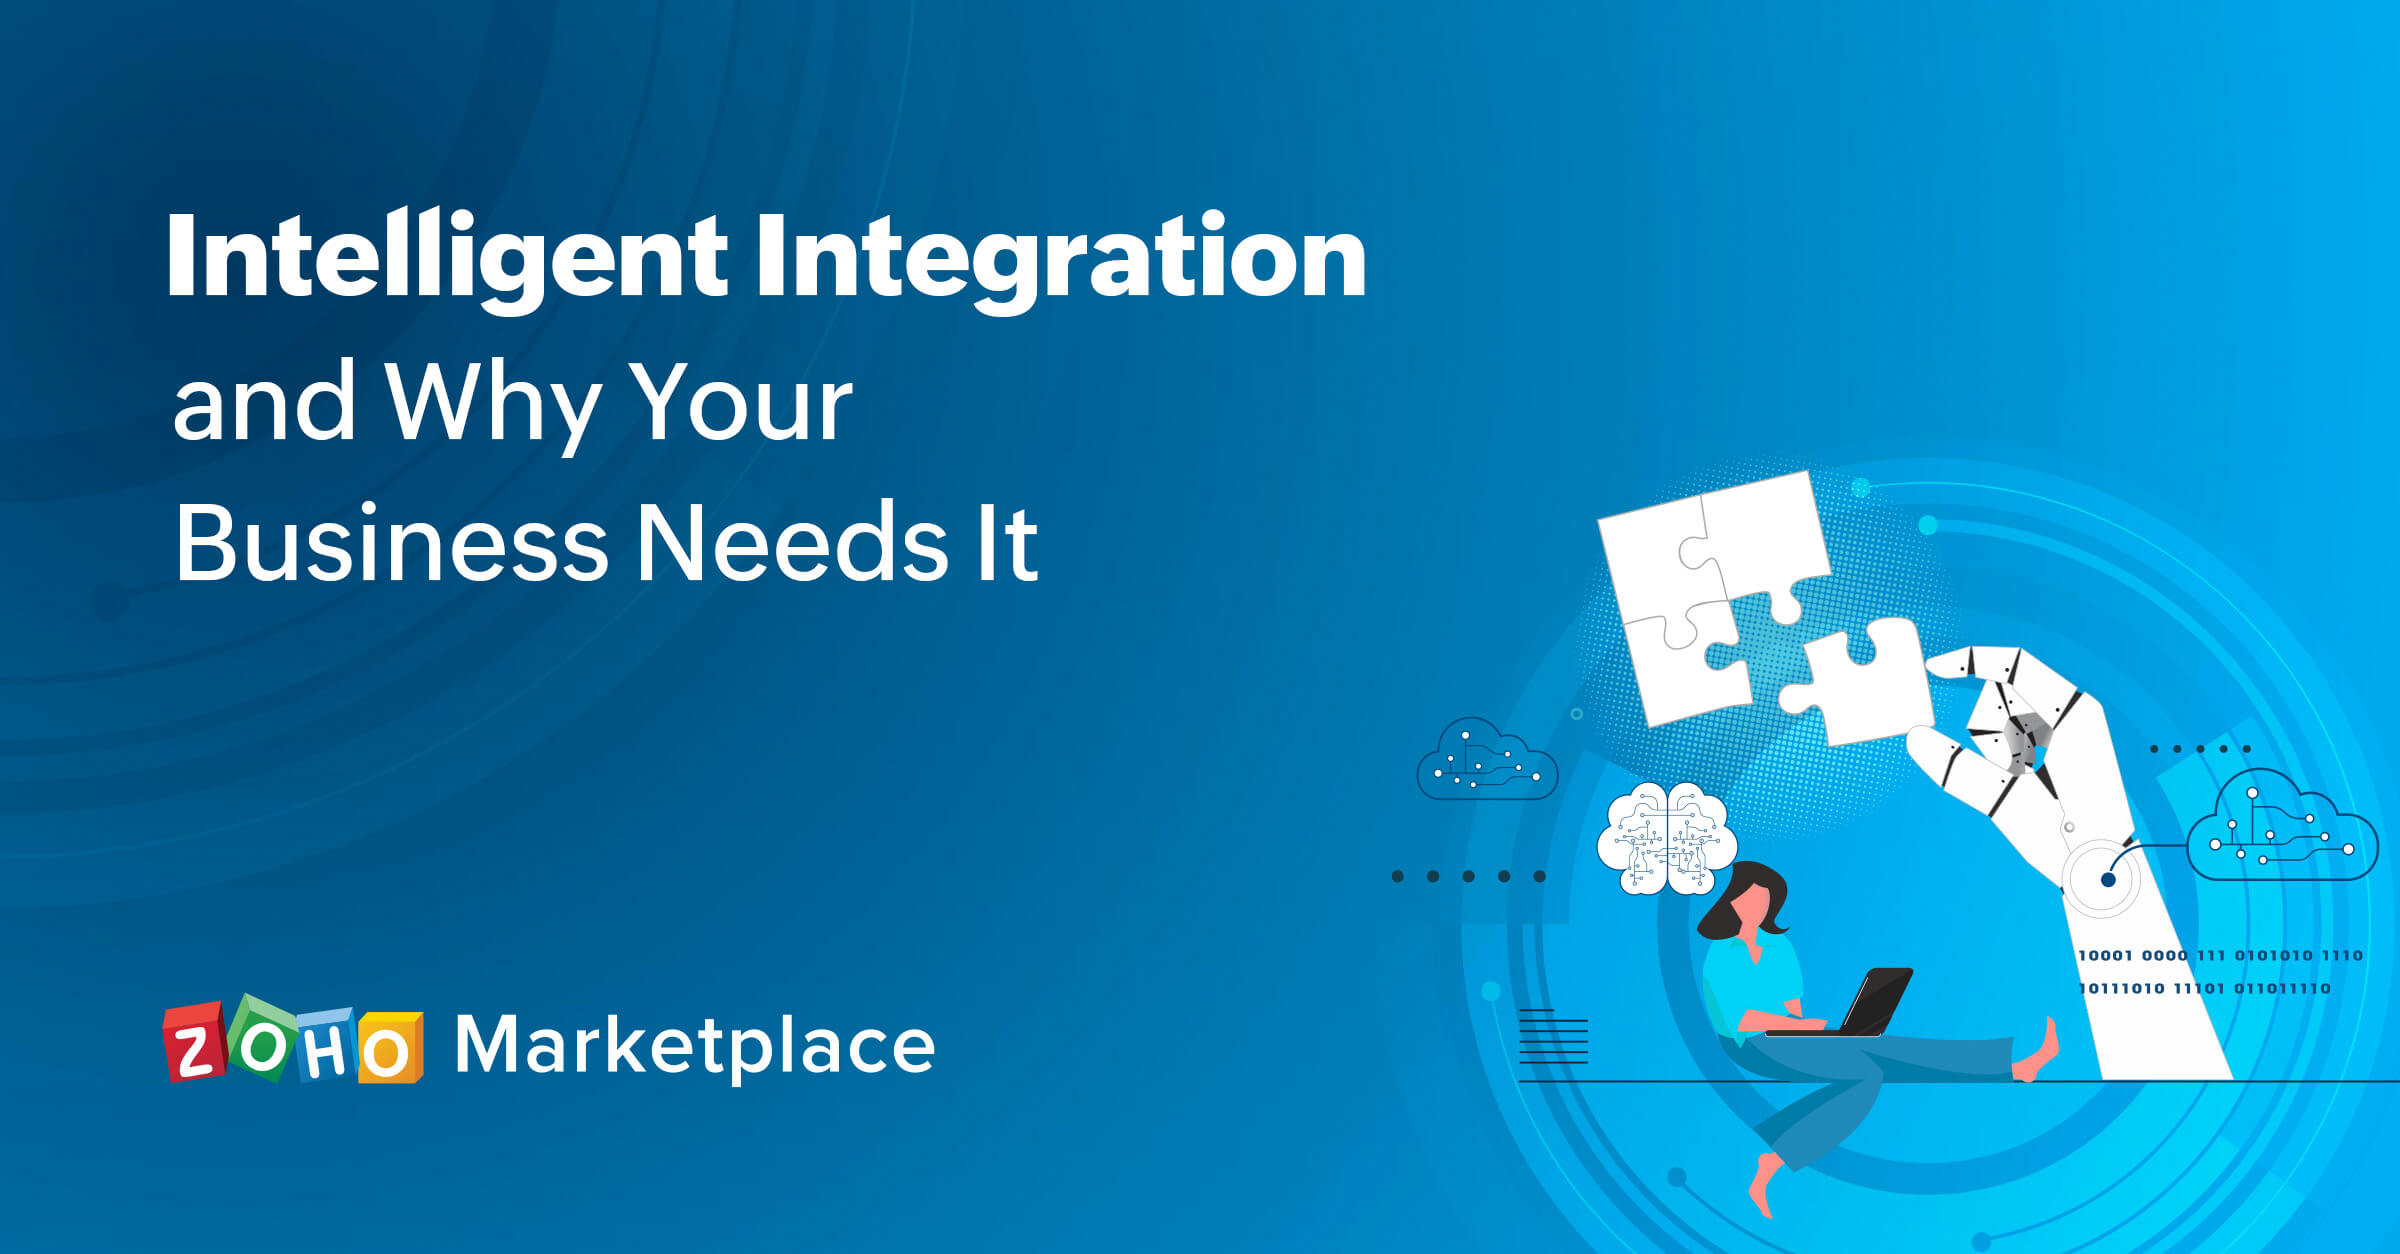 Intelligent integration and why your business needs it